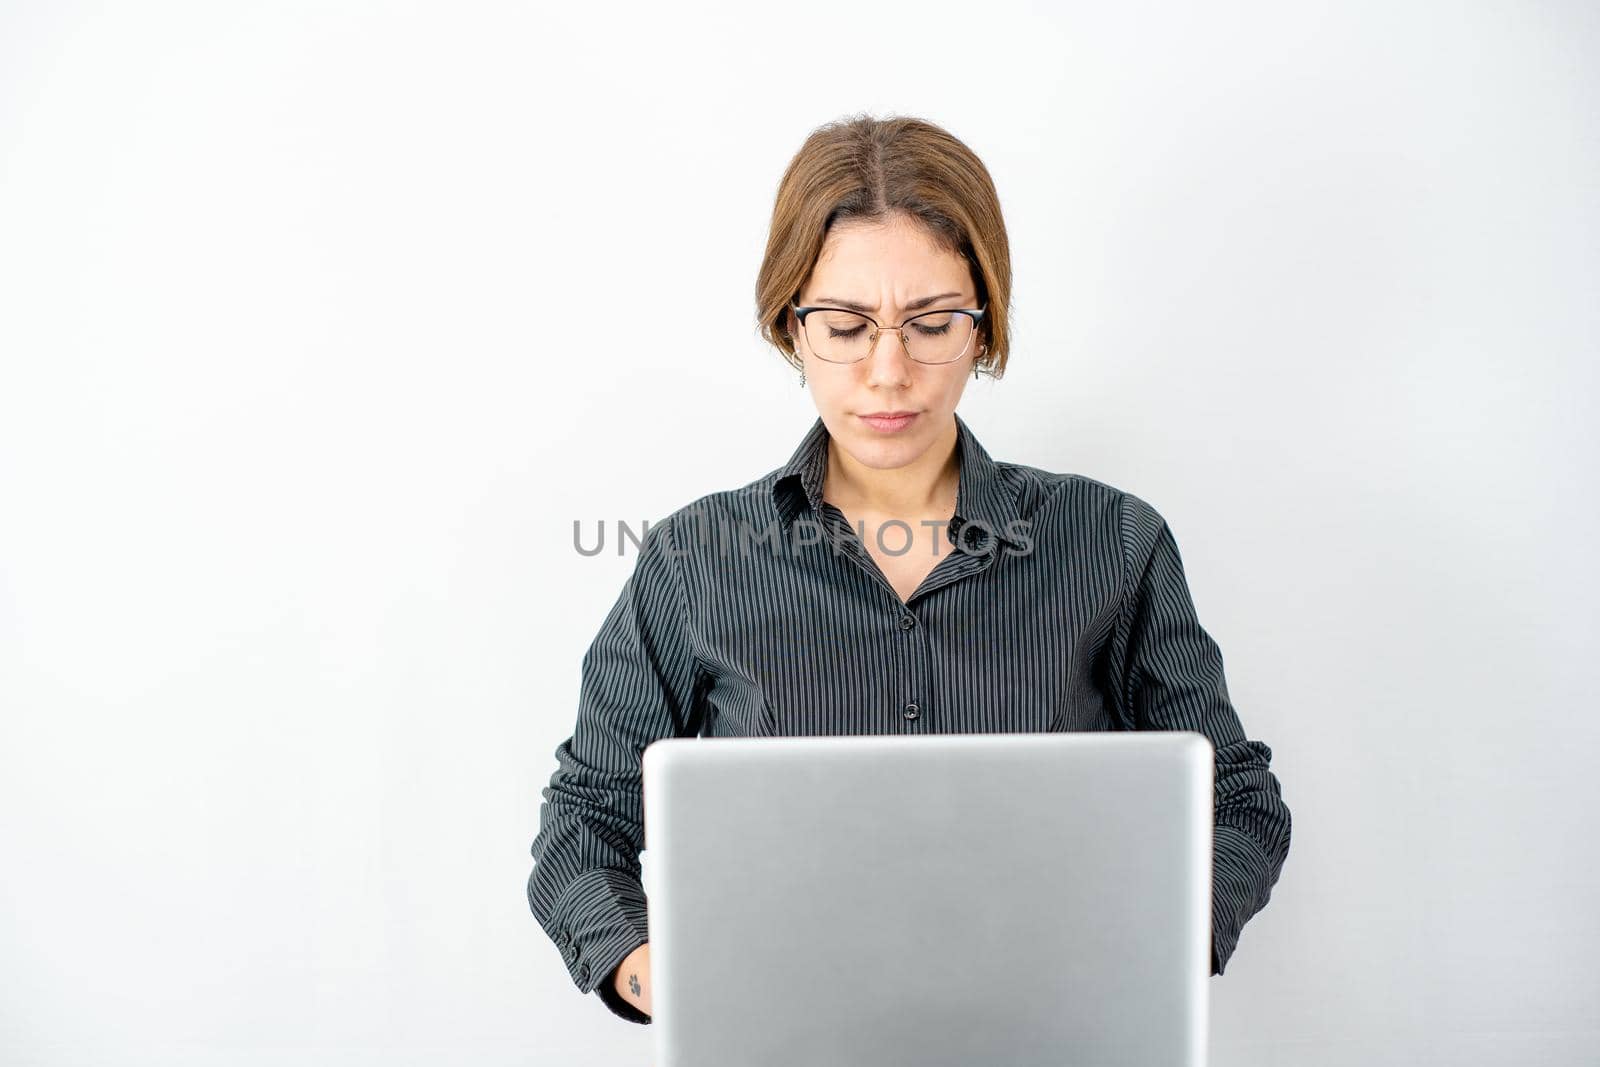 Business woman with dark shirt and glasses concentrated on computer work looks at the screen wearing work clothes isolated on copy space white background. Women in technological and communication jobs by robbyfontanesi